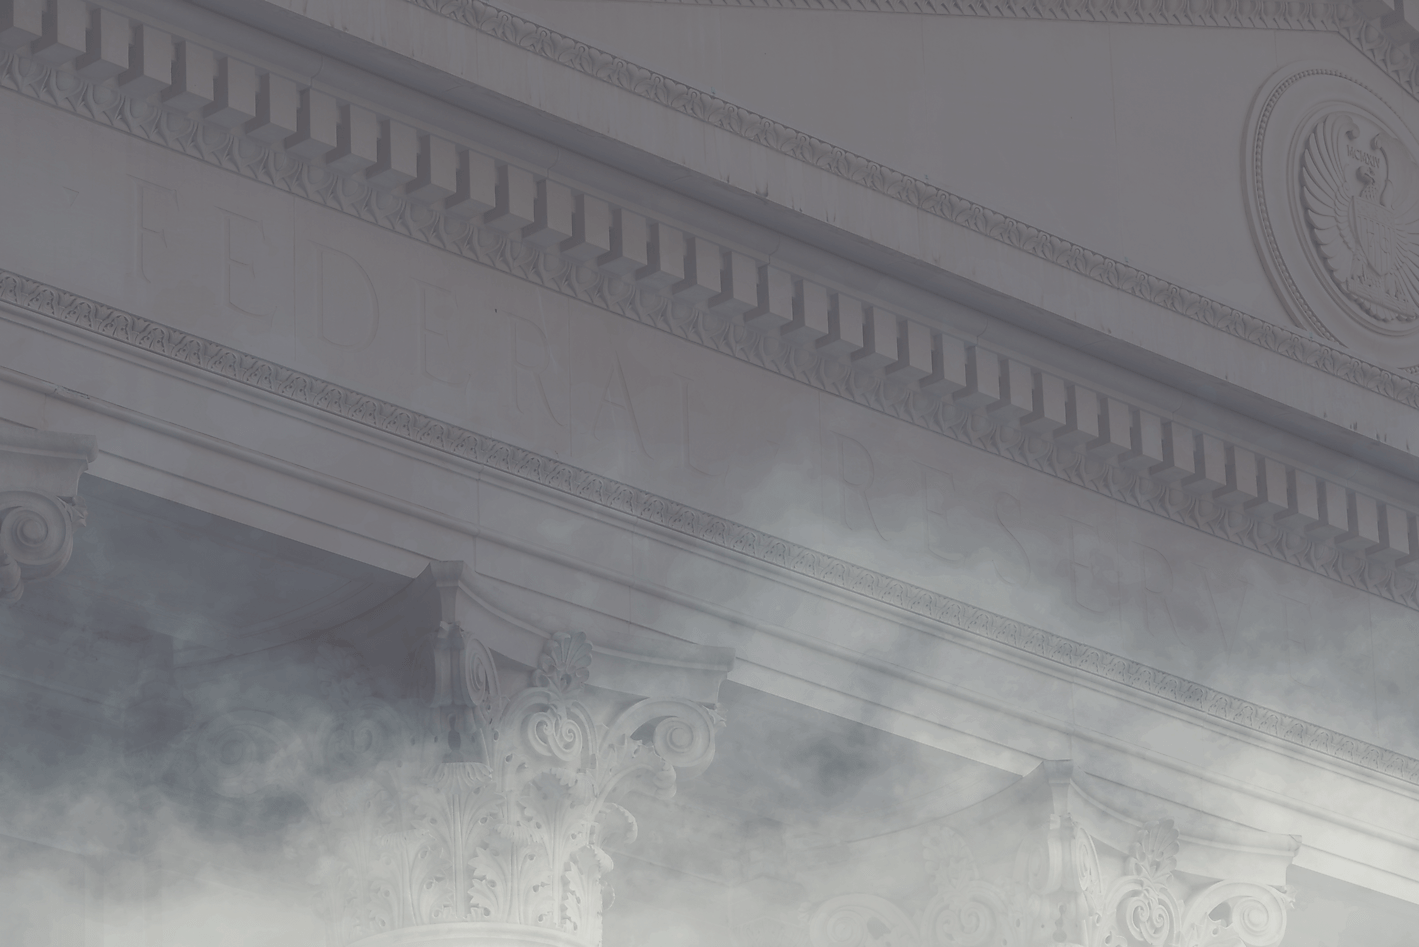 Facade of the Federal Reserve building partially covered in fog.